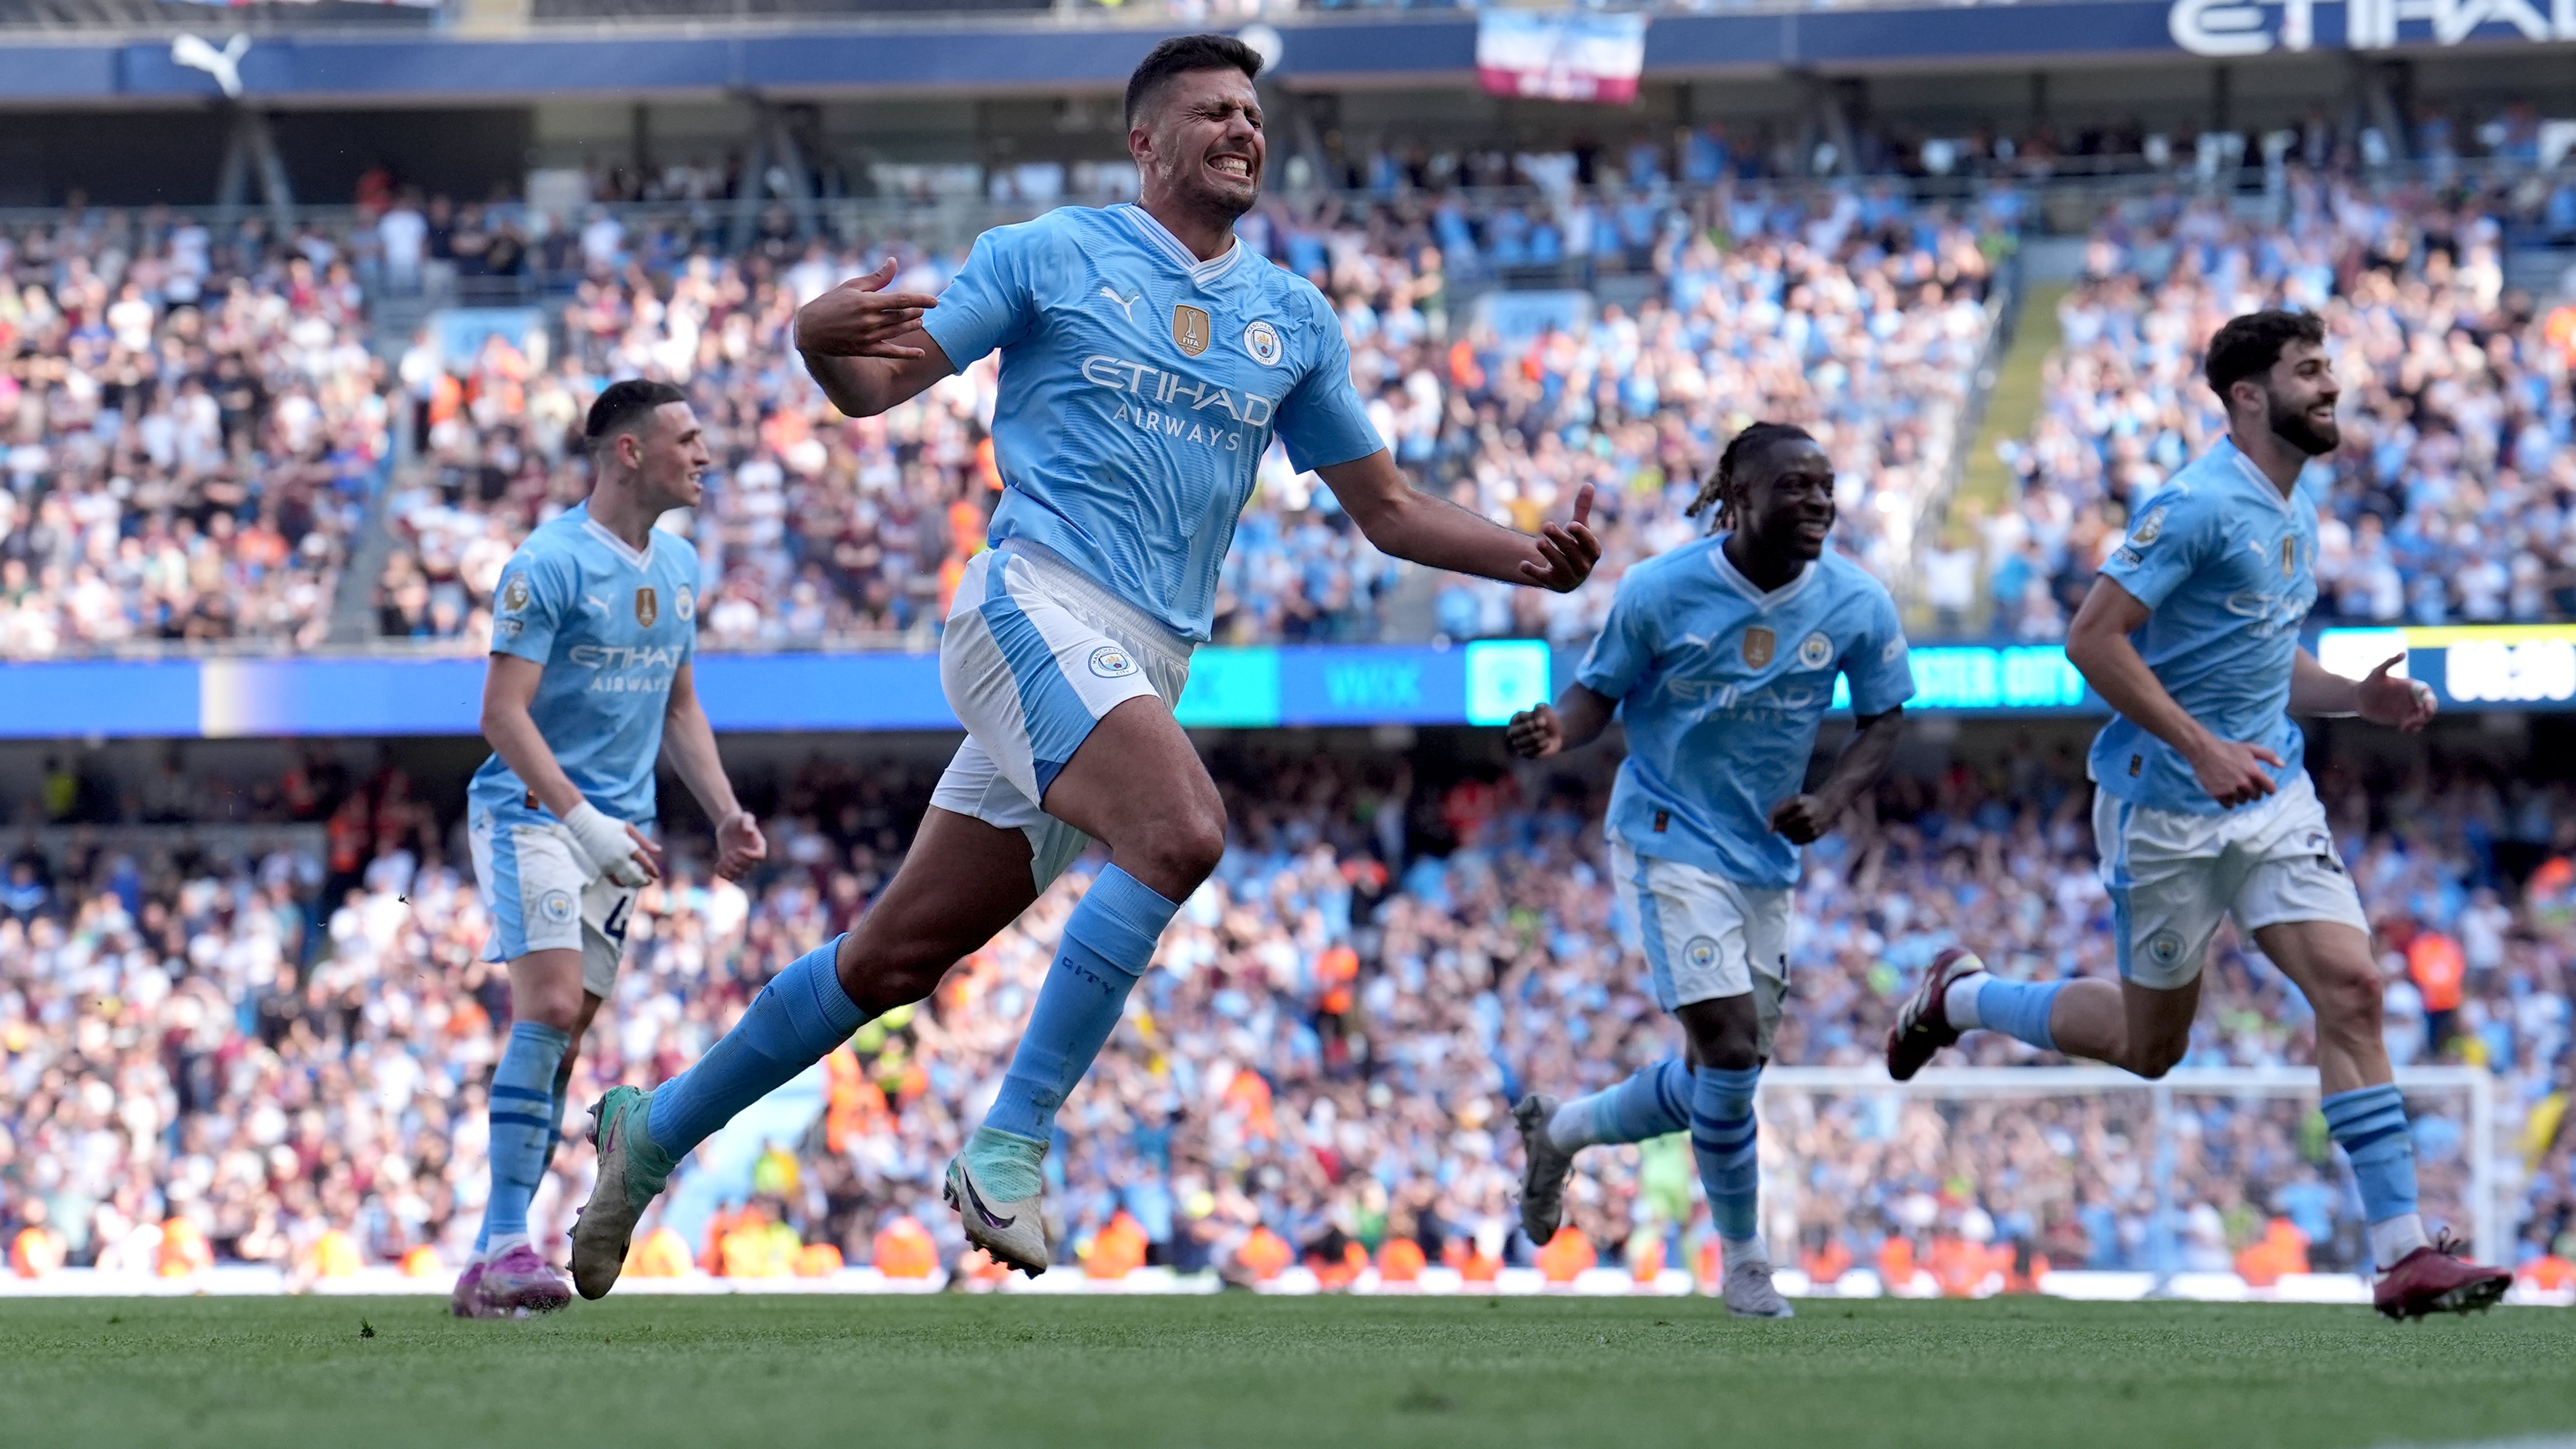 Rodri was key for Manchester City throughout their campaign